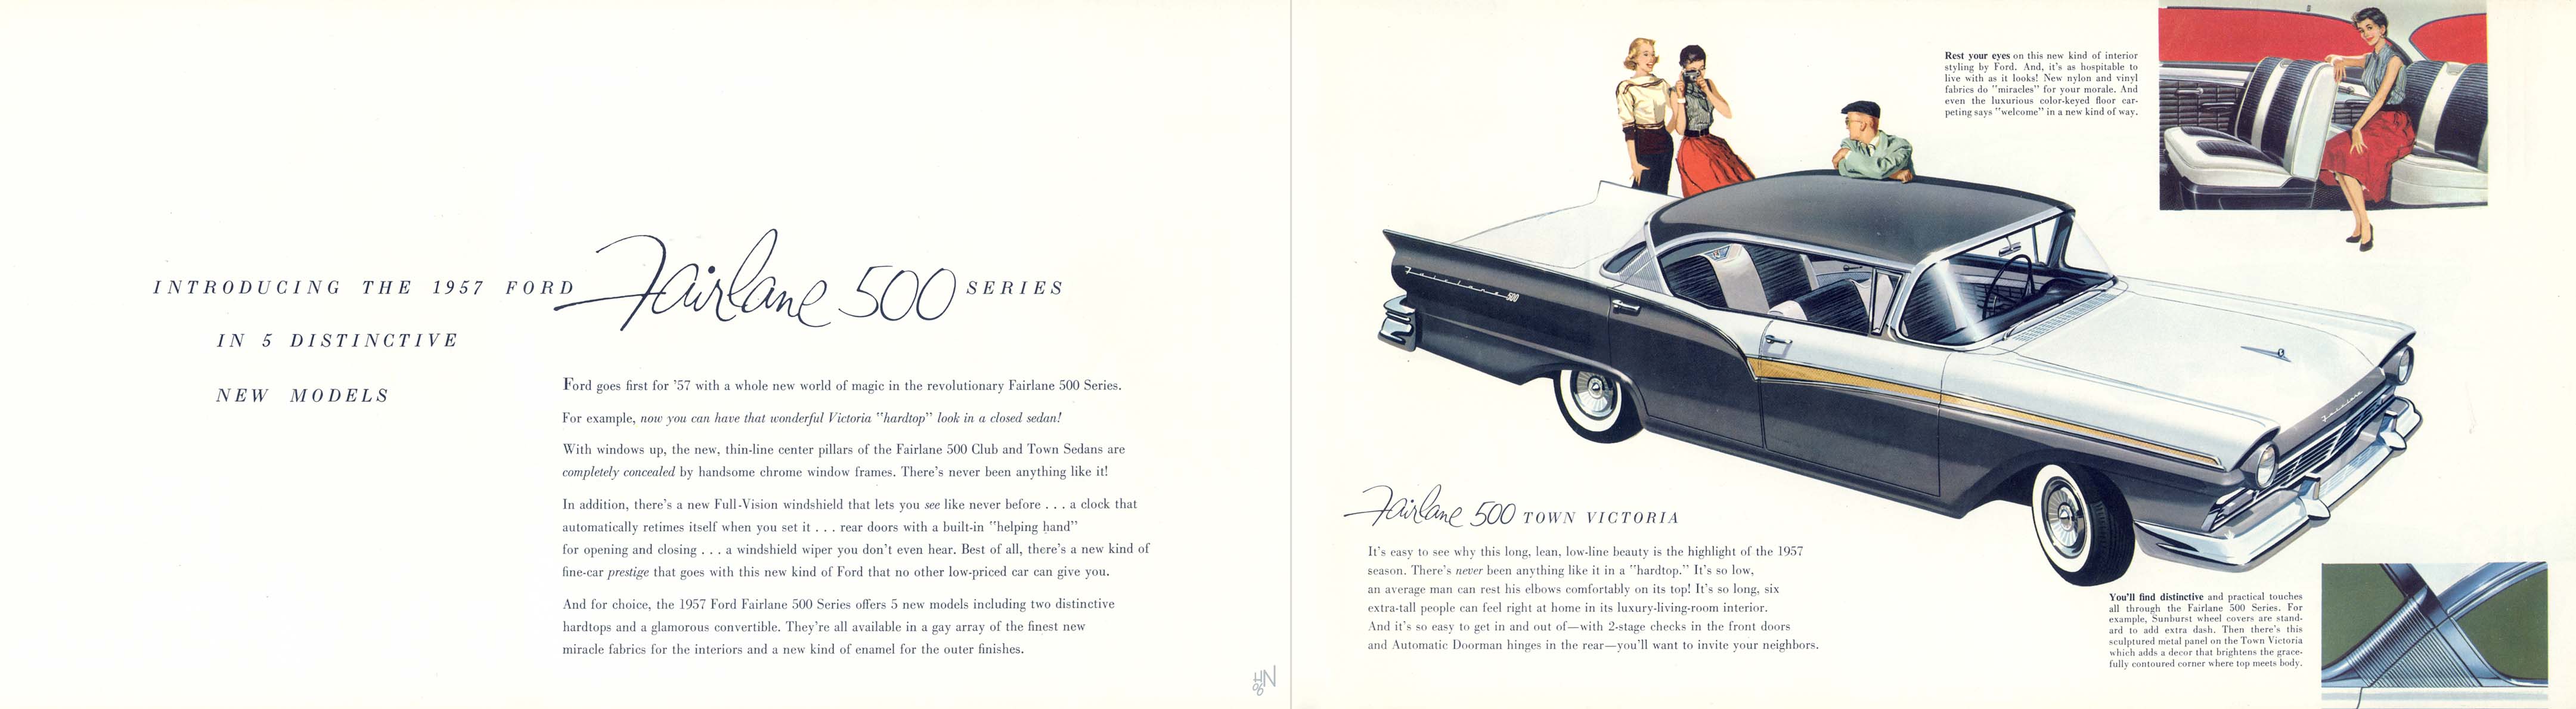 1957 Ford Fairlane Brochure Page 3